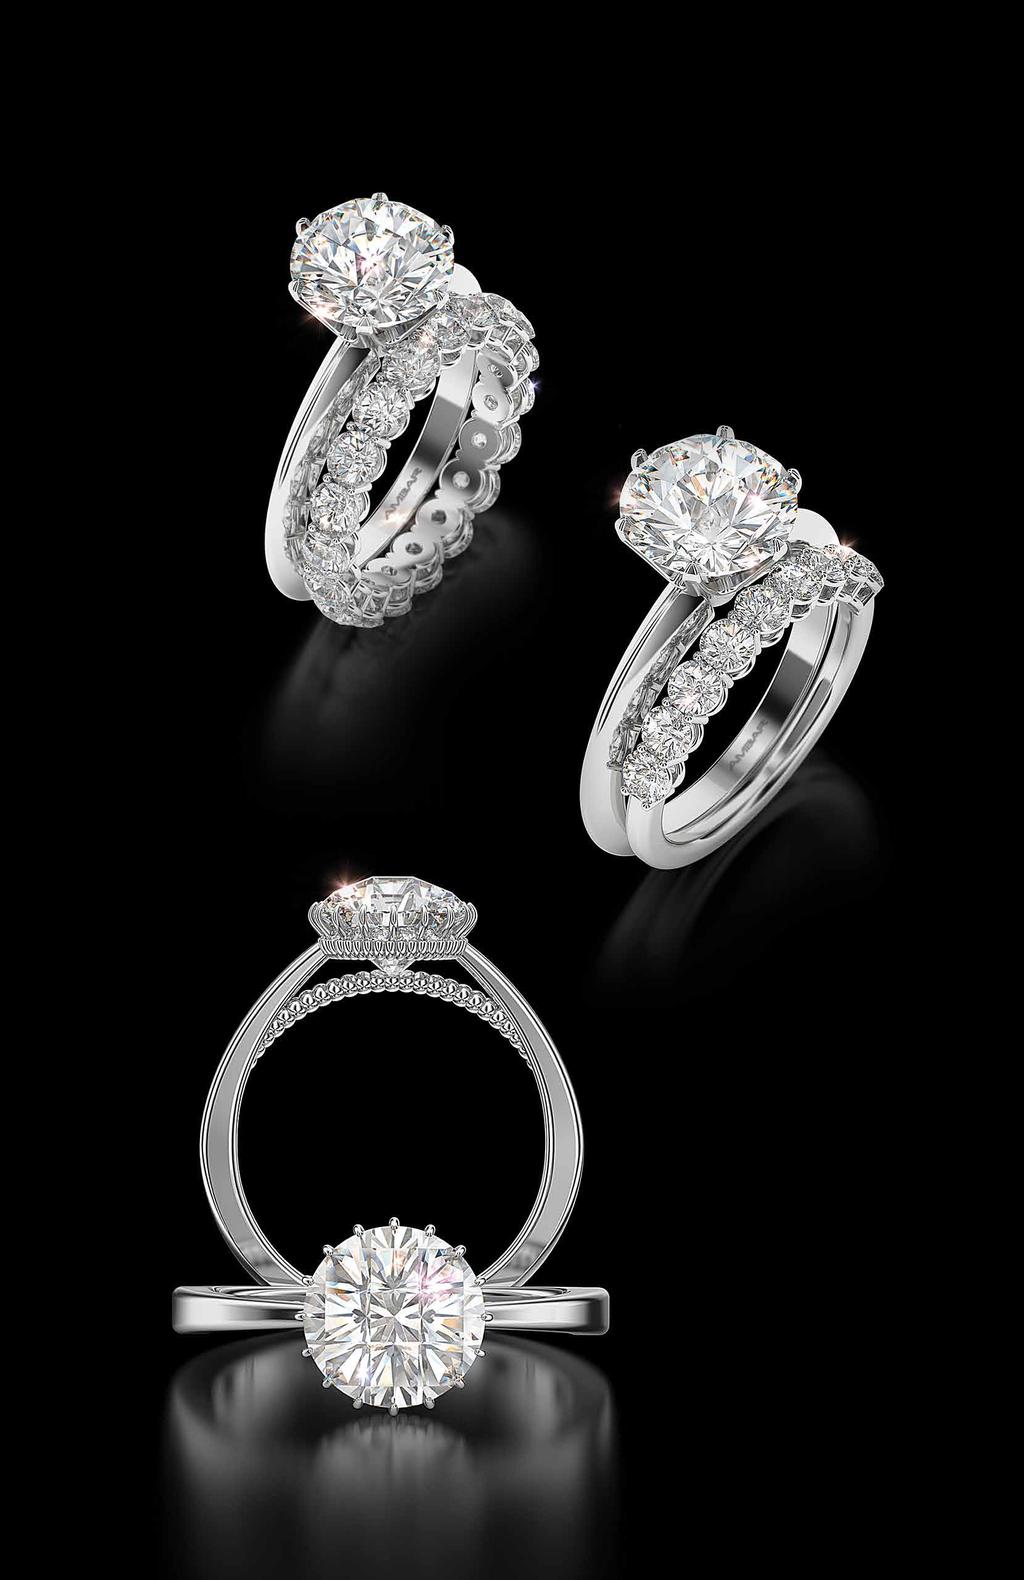 Divine Cut diamond bands are the perfect complement to a